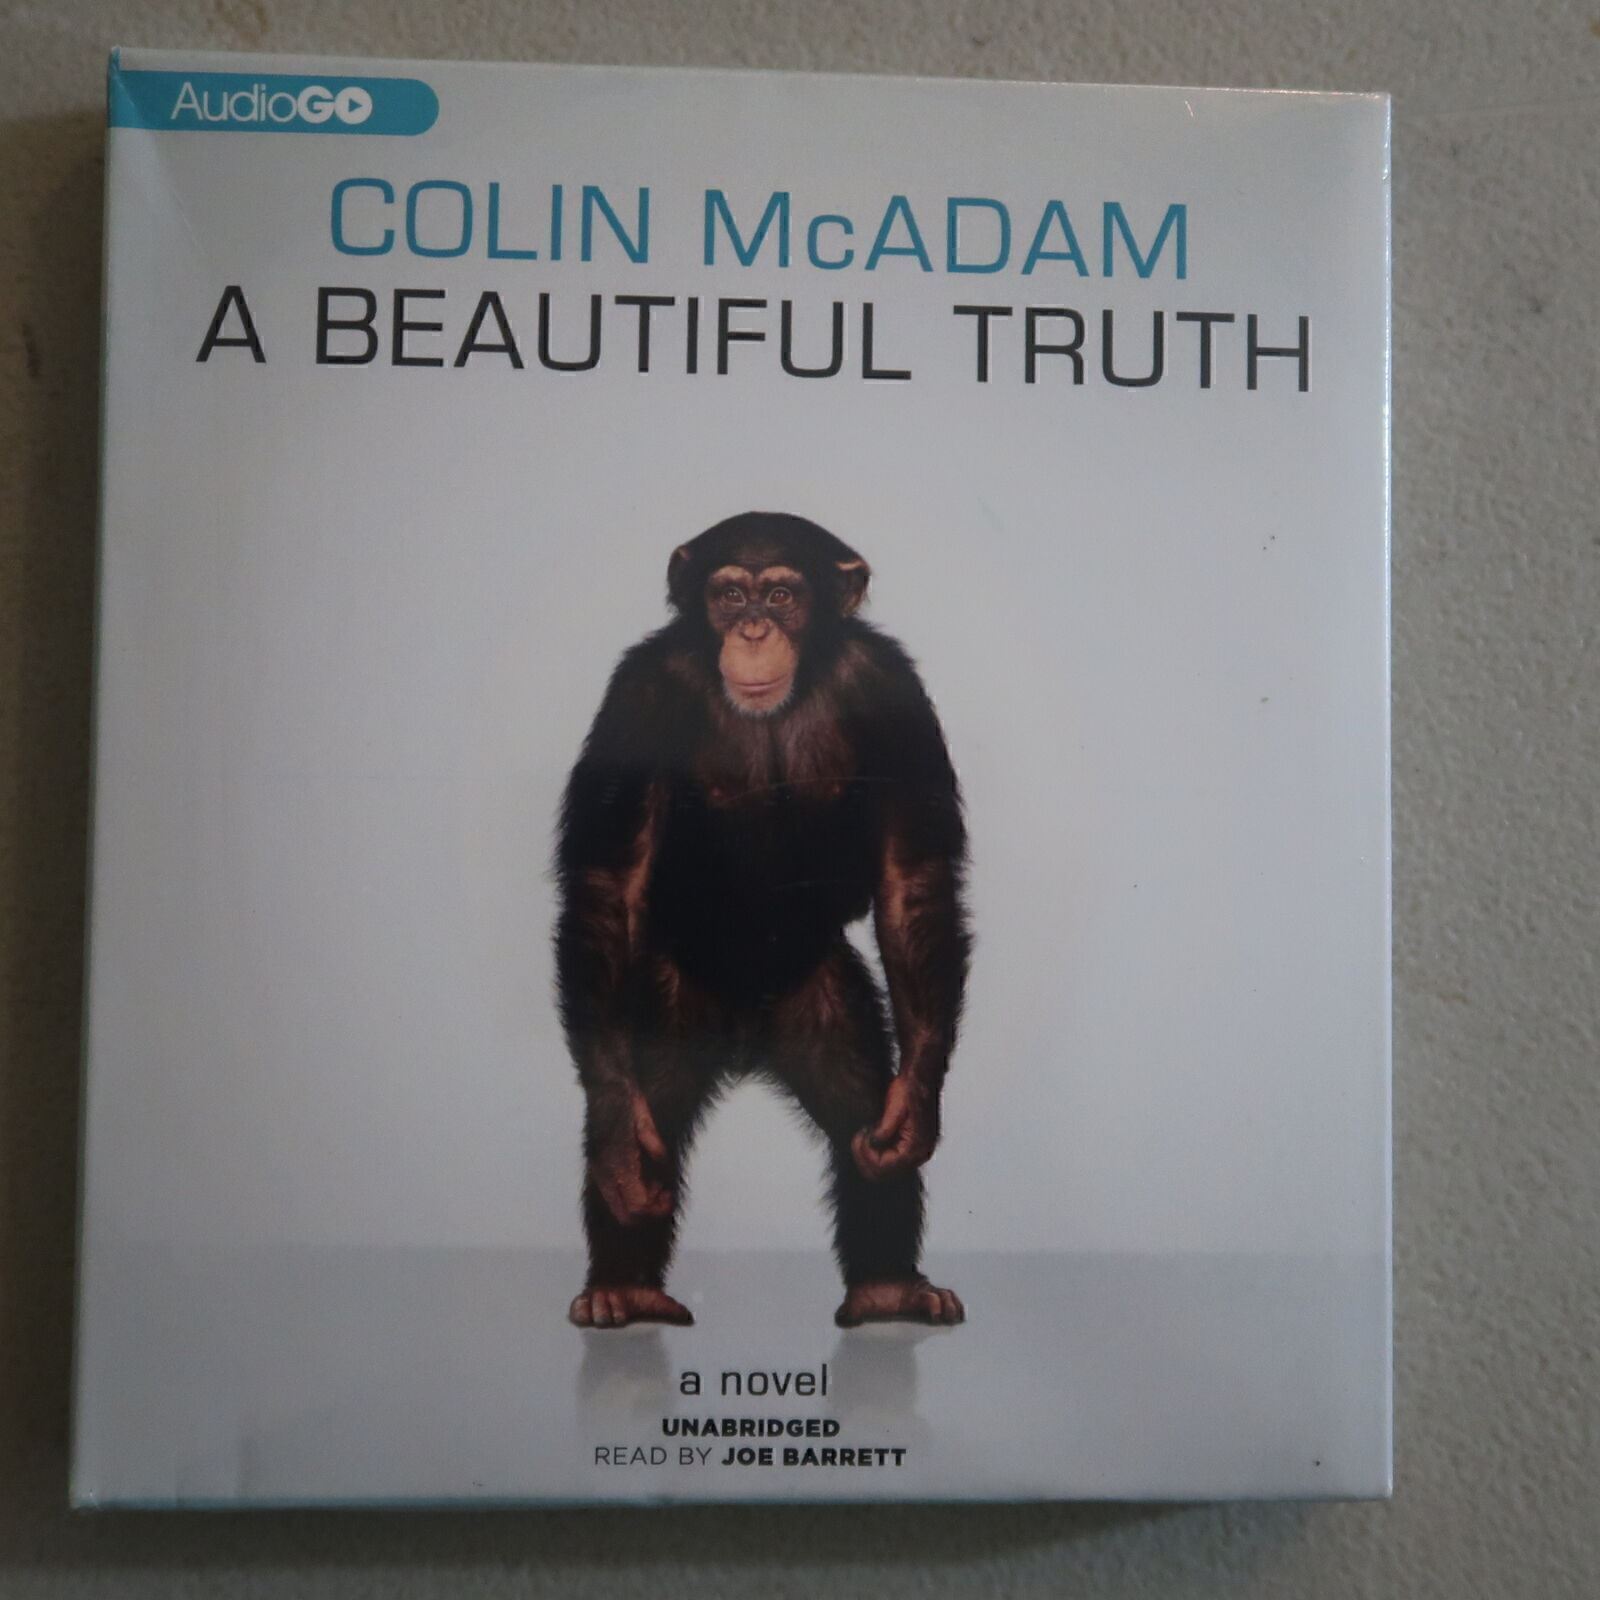 A BEAUTIFUL TRUTH   A NOVEL BY COLIN MCADAM   AUDIO BOOK ON CD  NEW